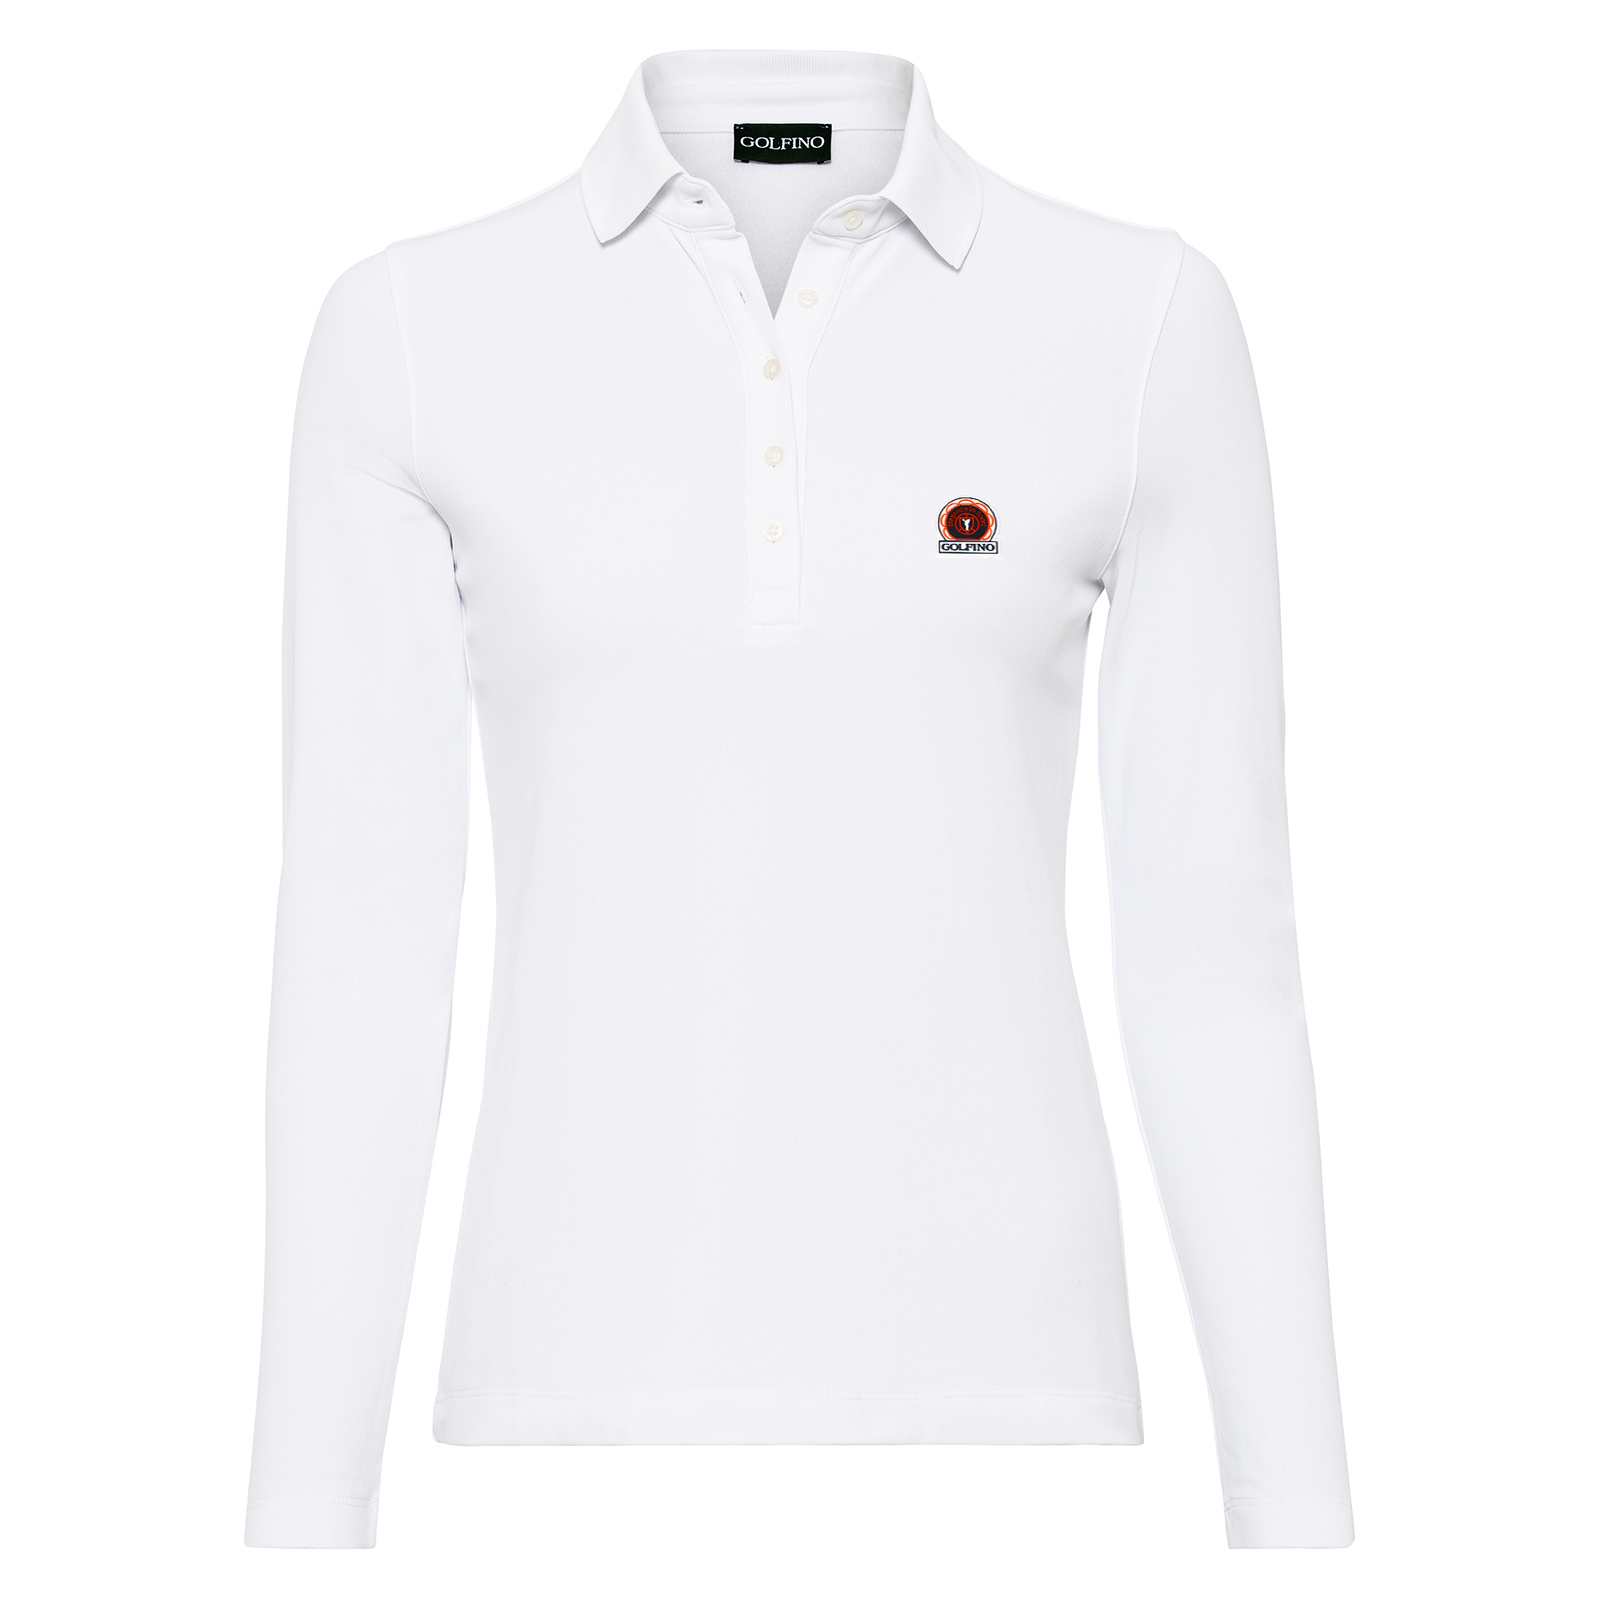 Ladies' moisture-wicking long-sleeved polo shirt with signature logo